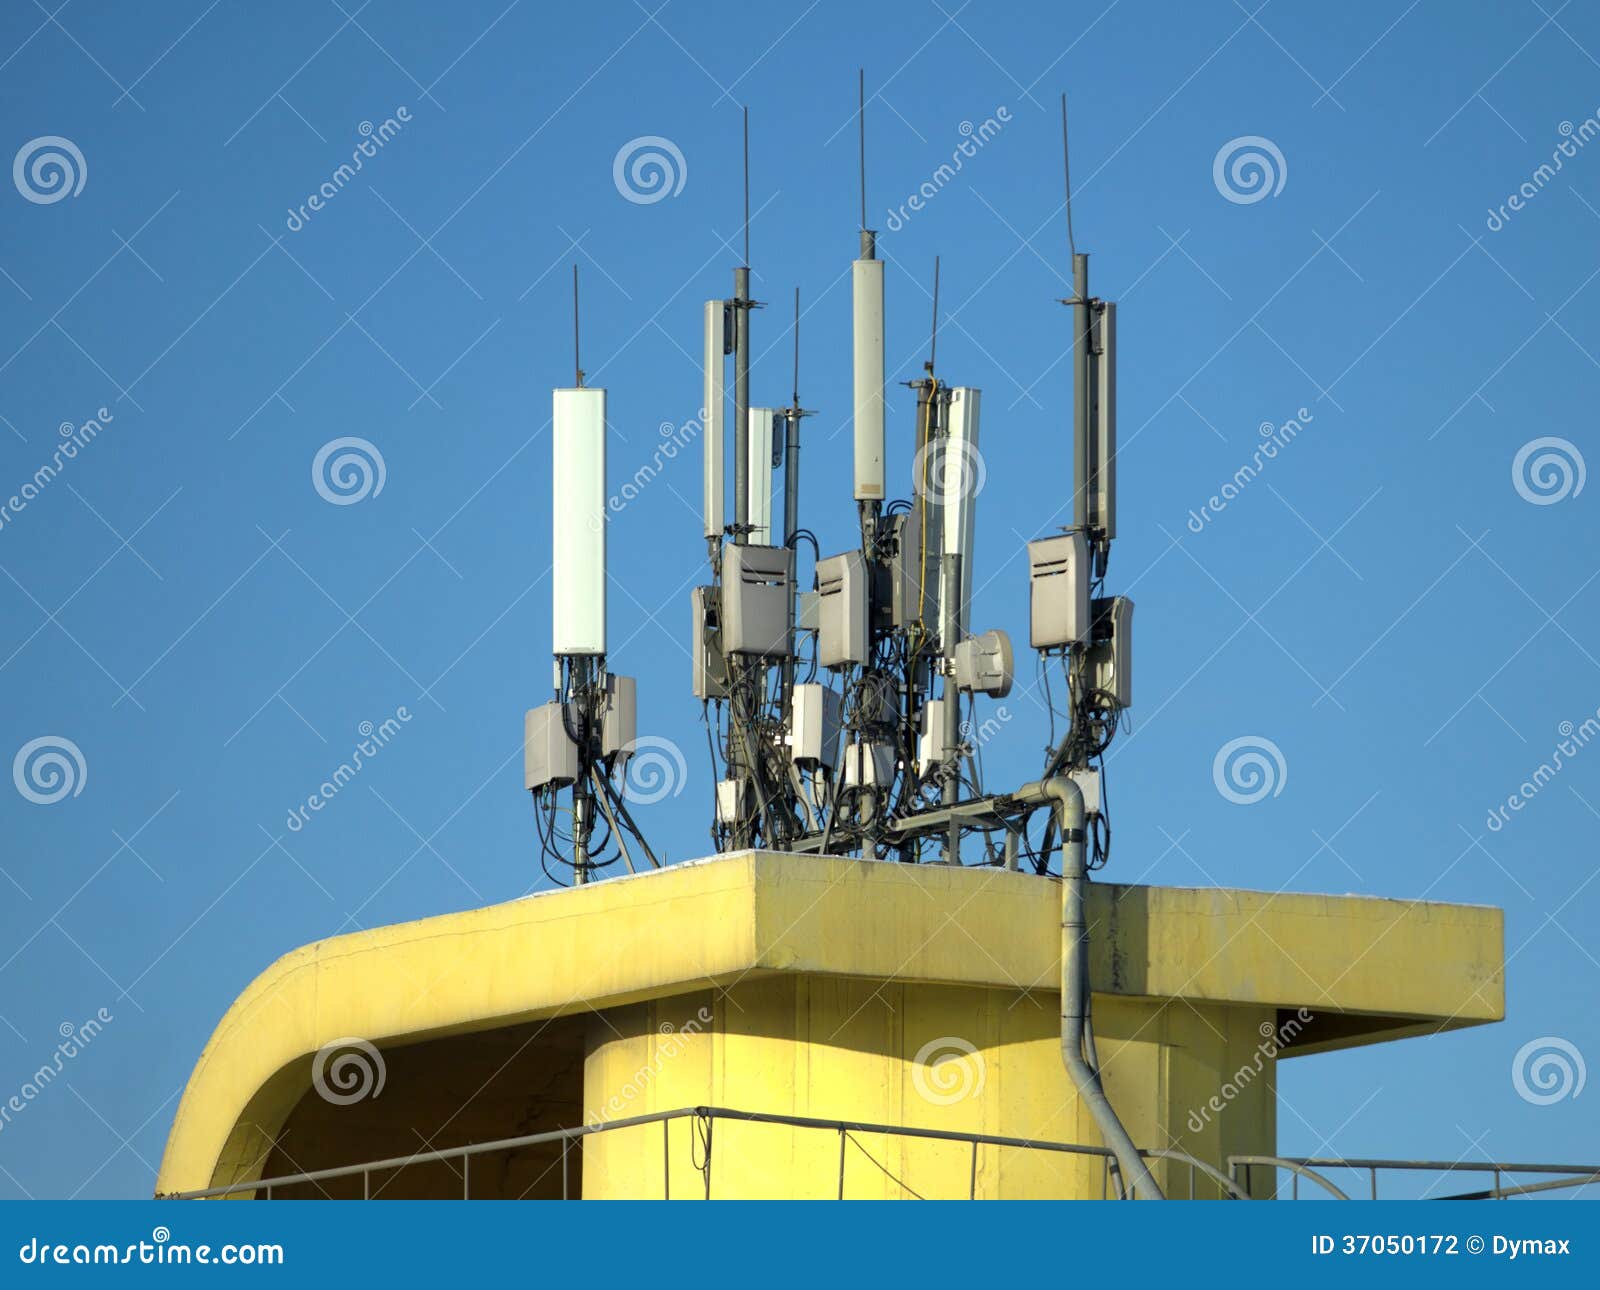 many electronics aerials on yellow building top